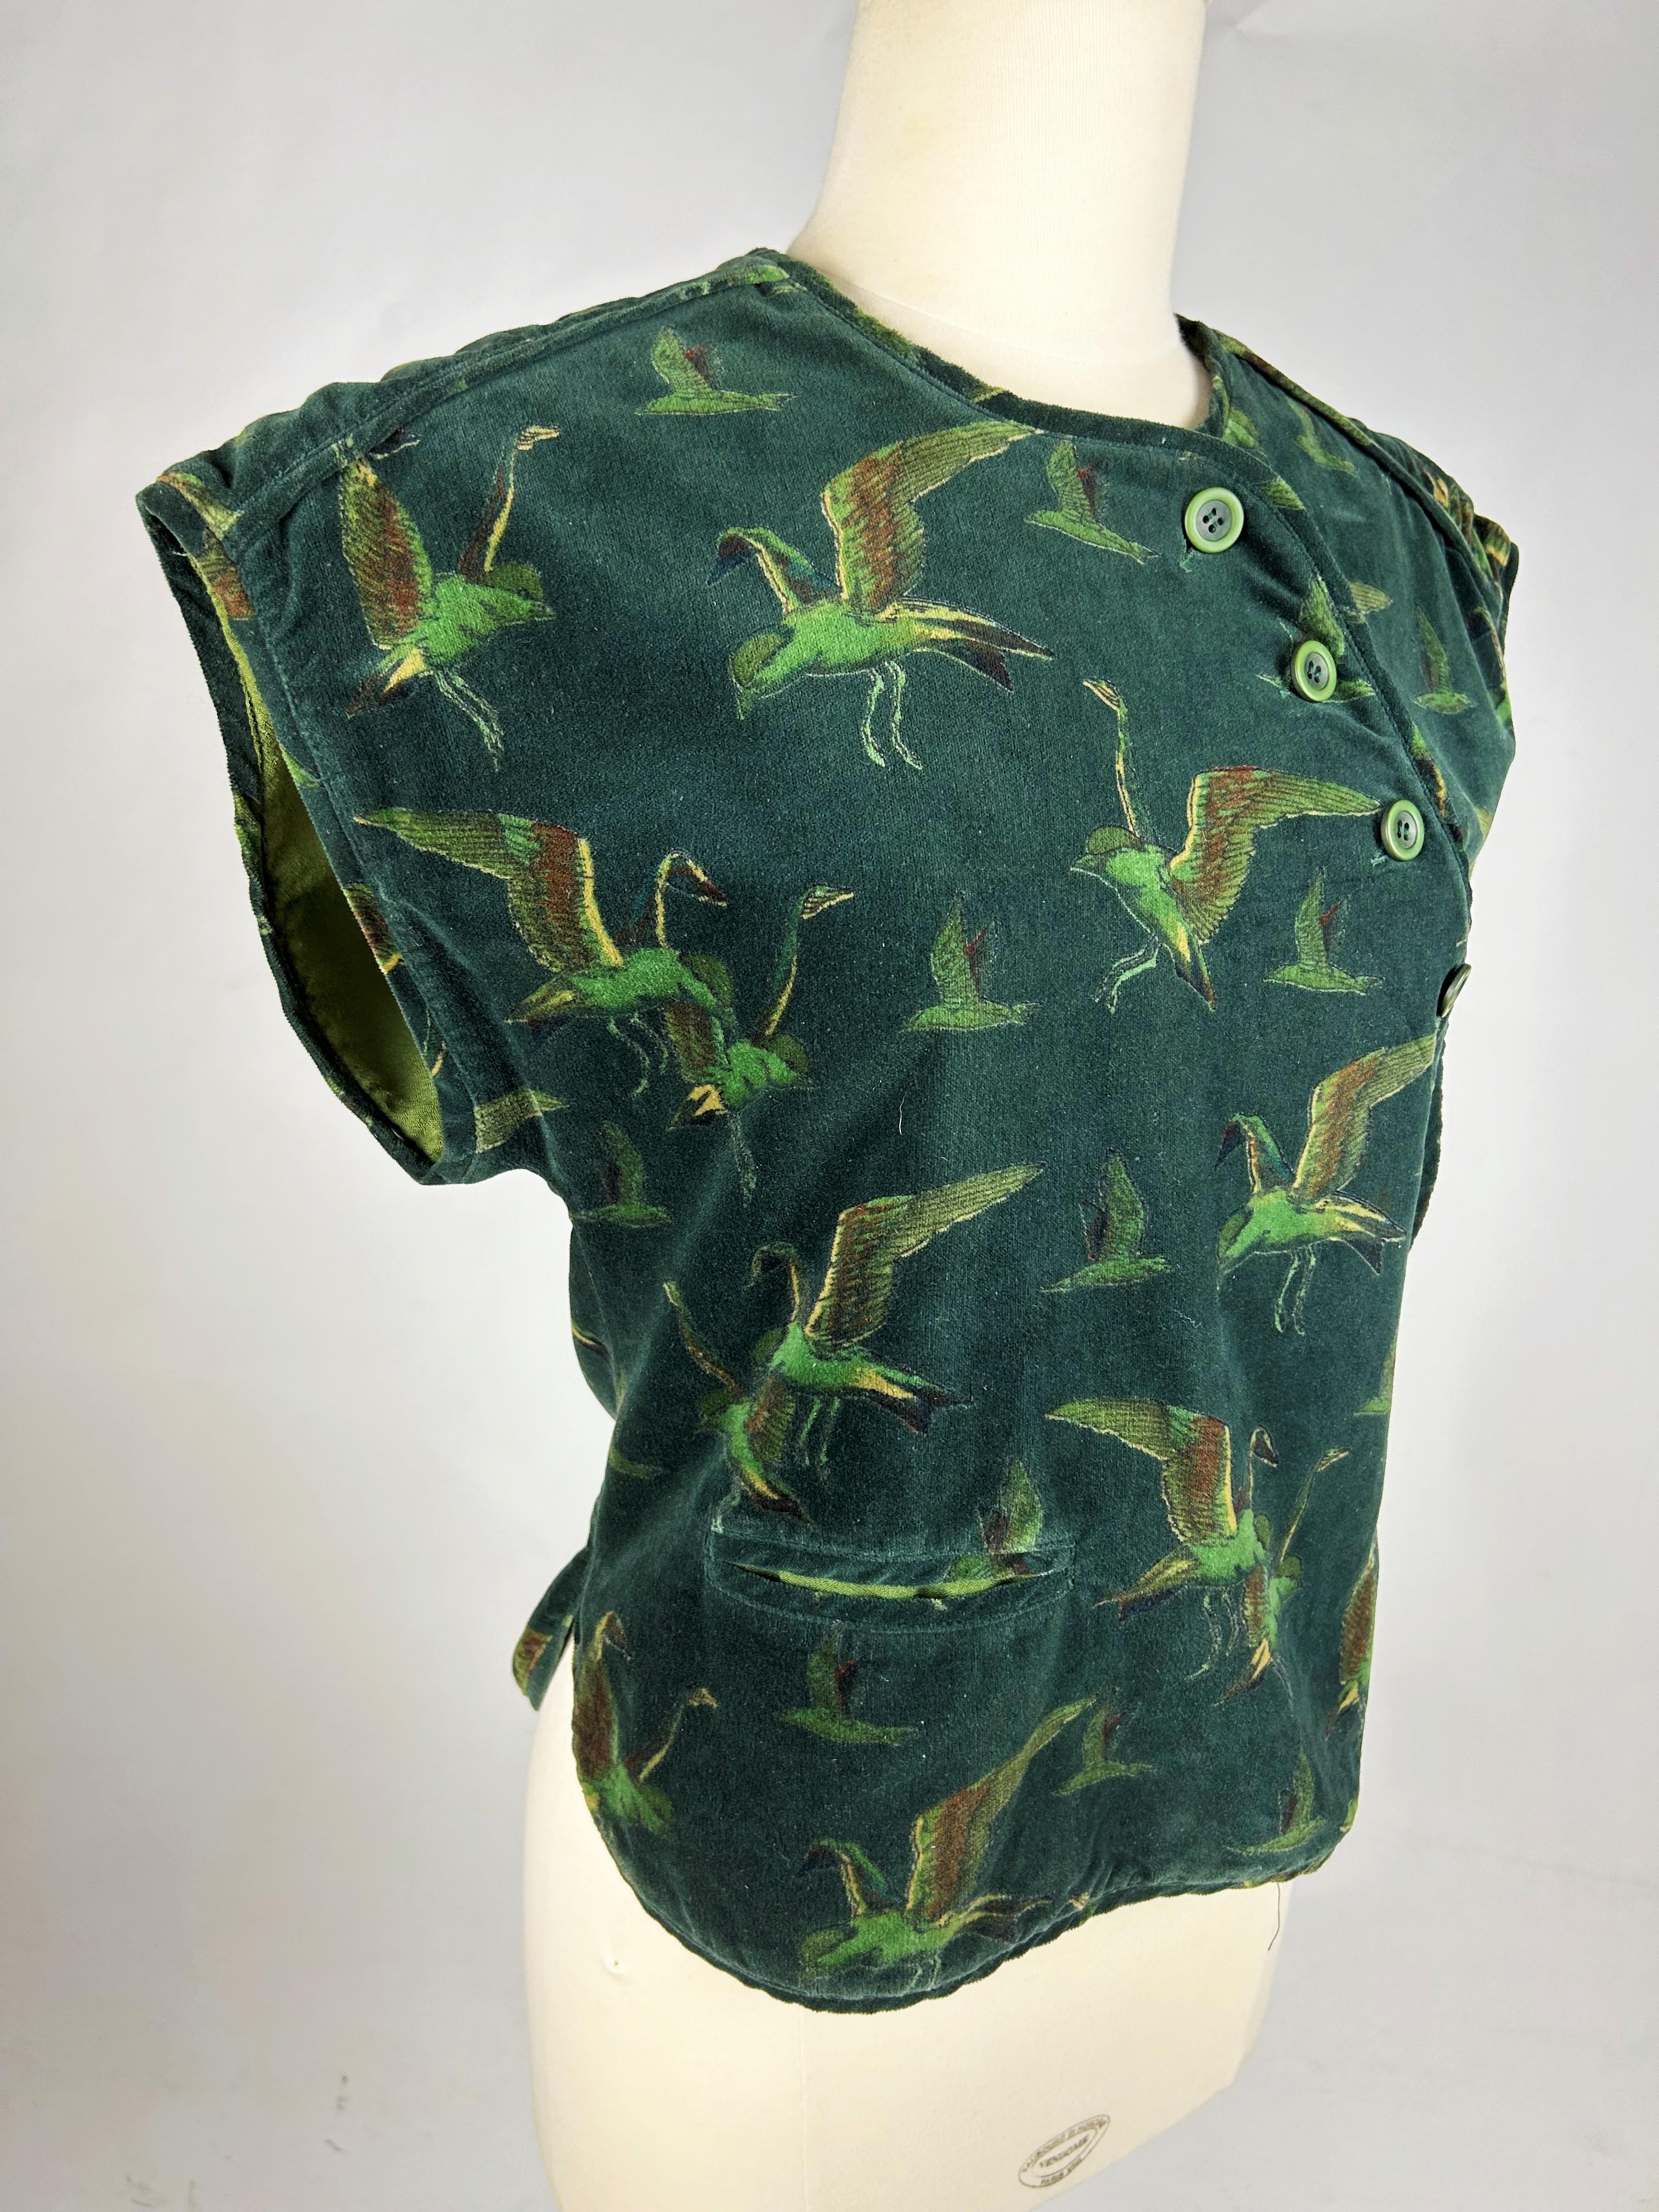 Circa 1975

France

Rare Japanese-print velvet bolero from the early days of Kenzo Takada and his first brand Kenzo Jap dating from the 1970s. Sleeveless wrap-around bolero with kimono cut-out at the shoulders, in bottle-green velvet printed with